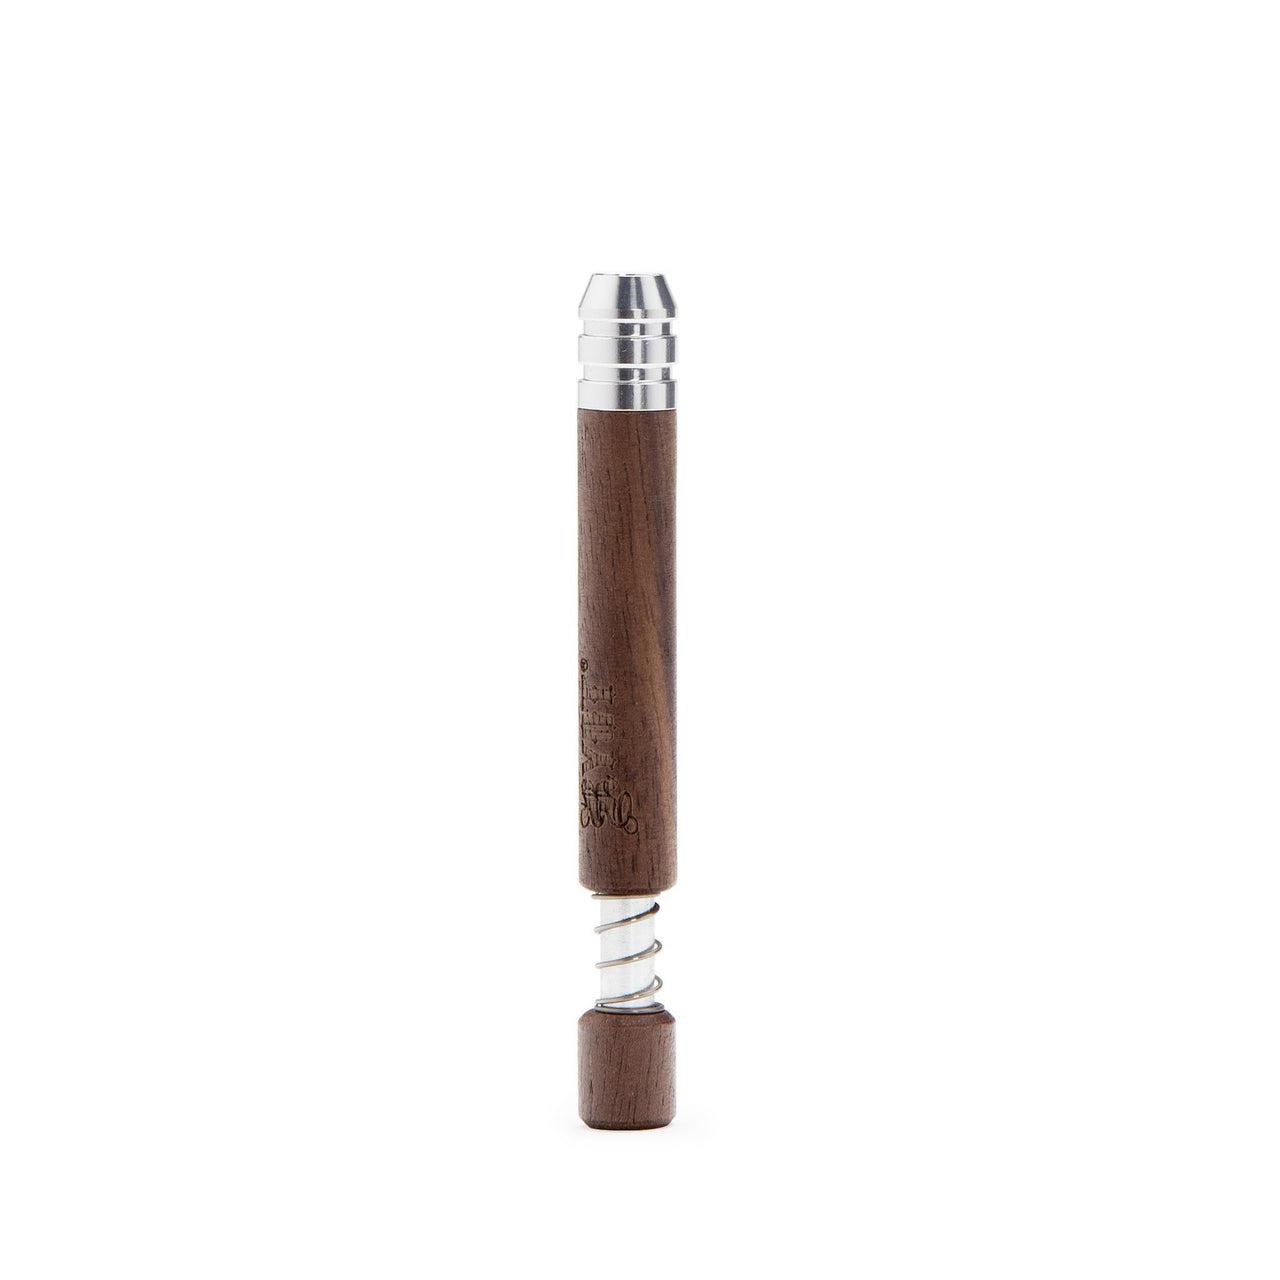 ryot wooden one hitter bat with spring